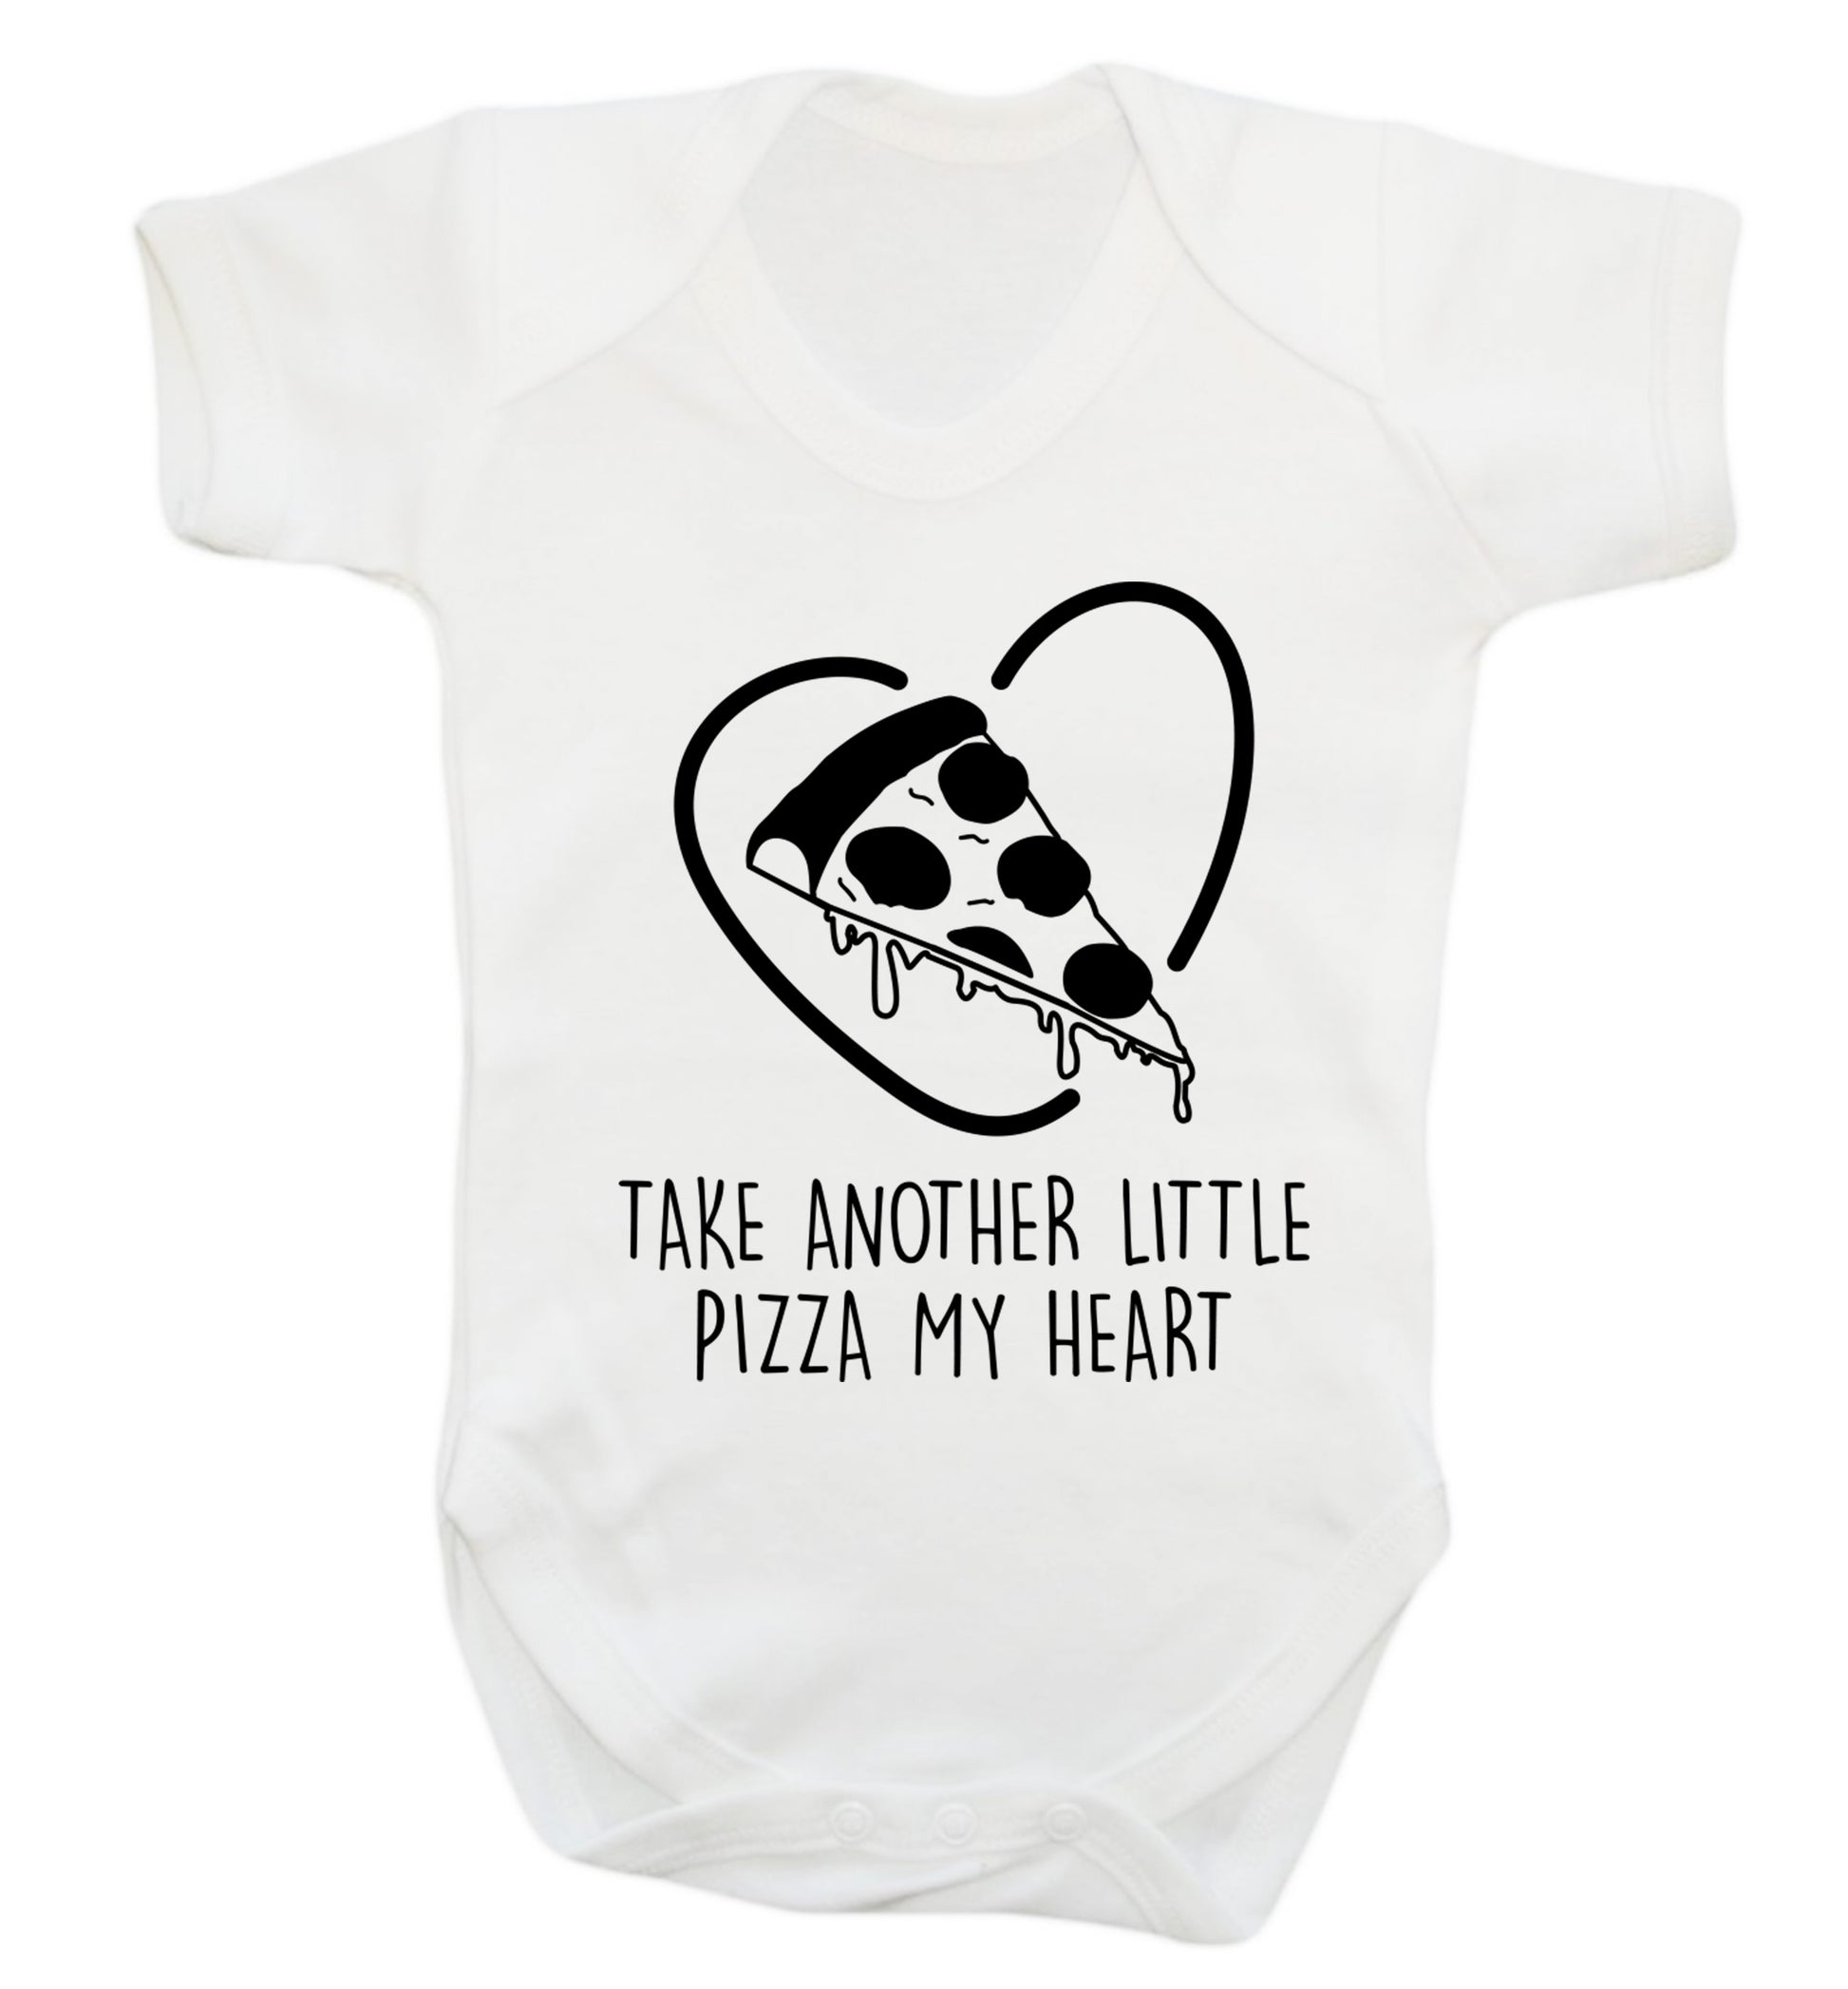 Take another little pizza my heart Baby Vest white 18-24 months